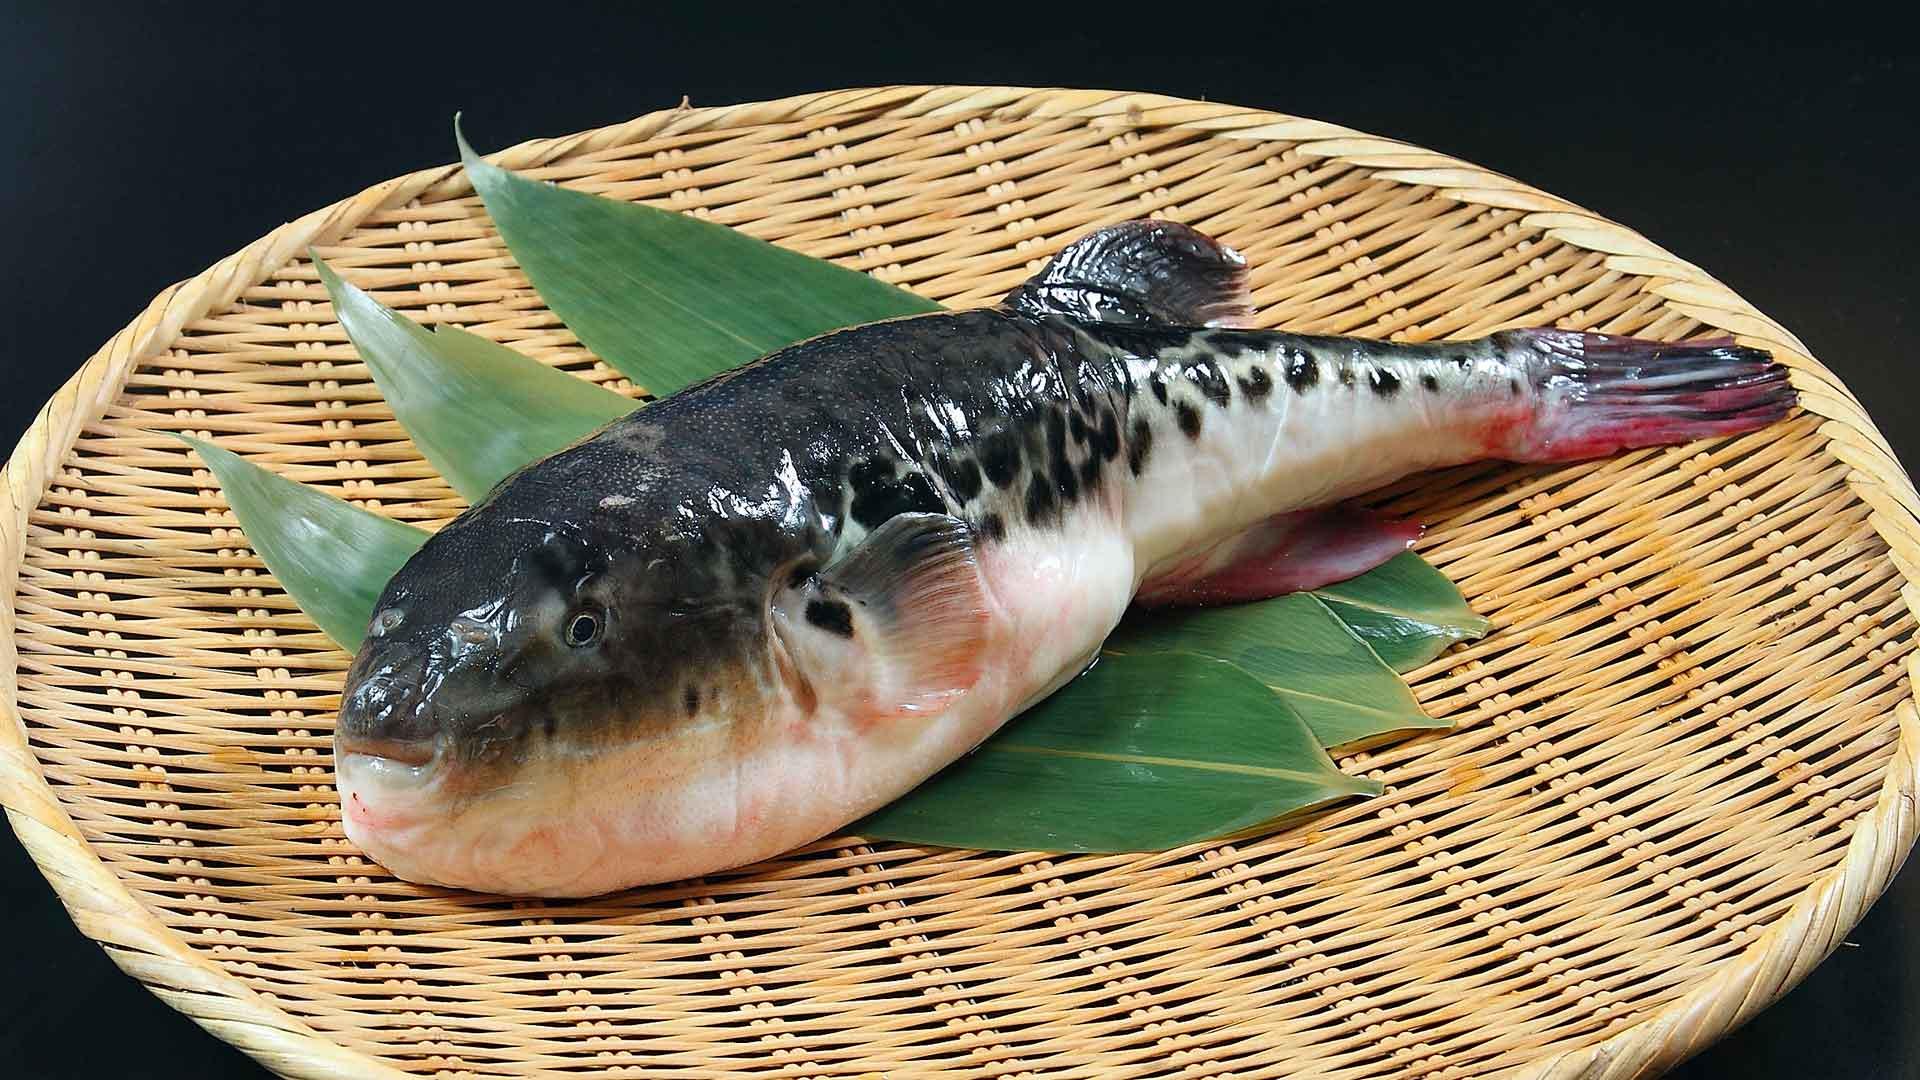 Eating Fugu Japan’s Poisonous Pufferfish byFood